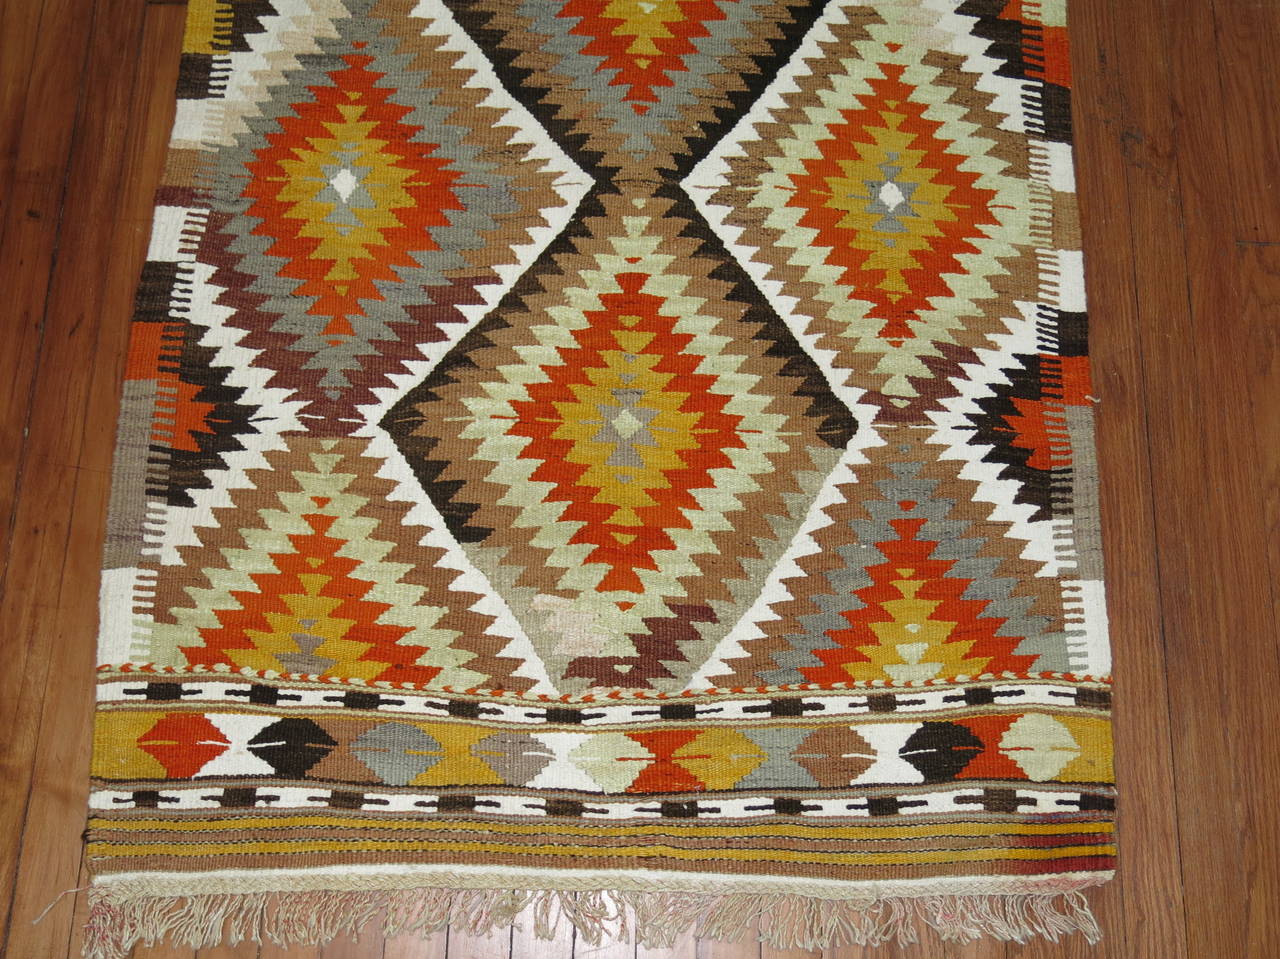 A handmade Turkish Kilim throw rug from the mid-20th century. Accents in light green, burnt orange, gray, brown

Measures: 3'3'' x 5'1''.